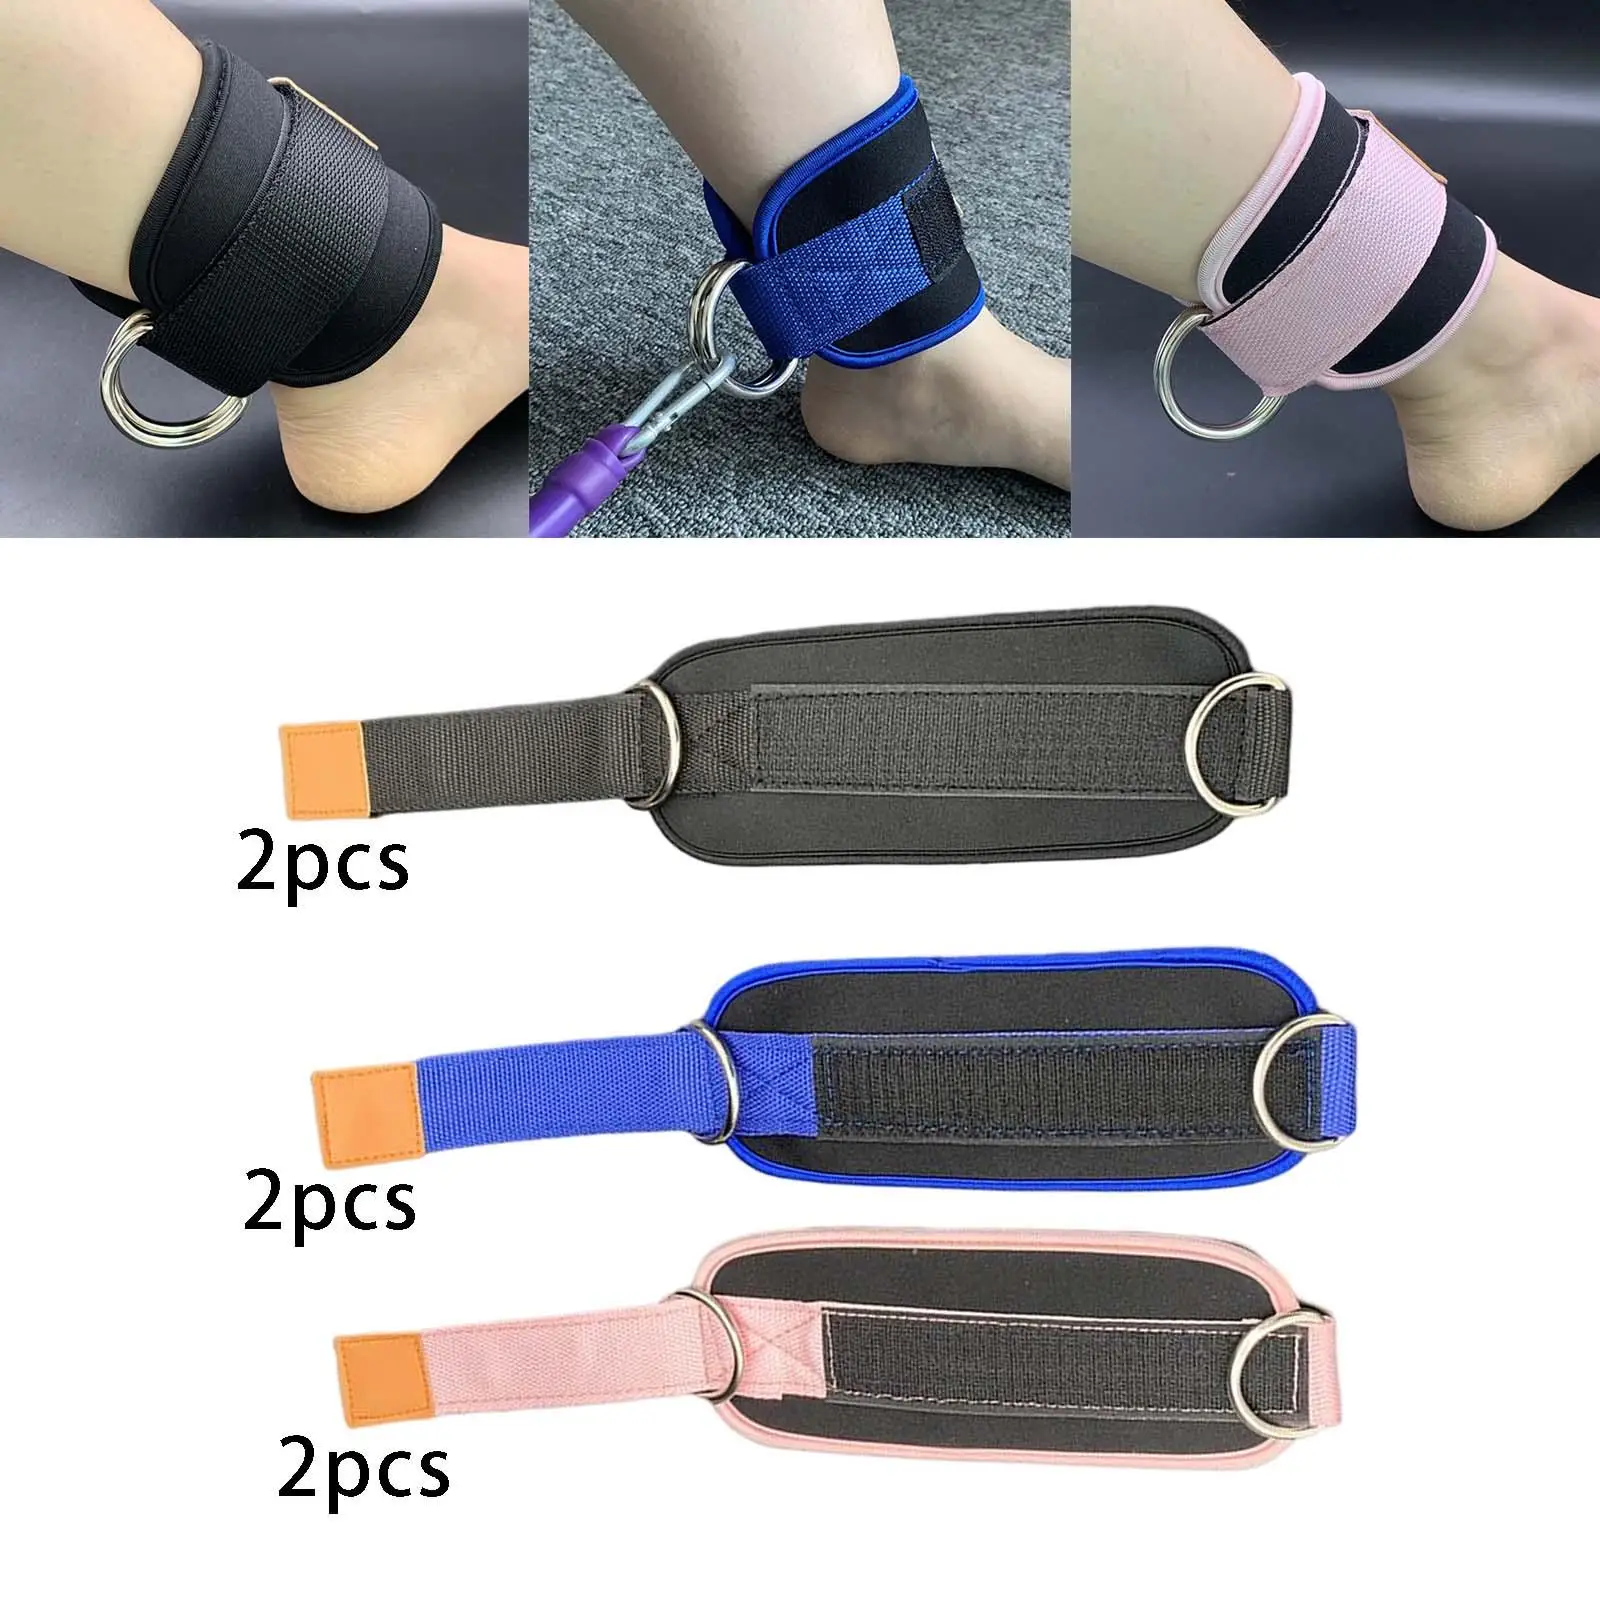  Straps for Cable Machine Attachments for Glute Workouts Leg Extensions